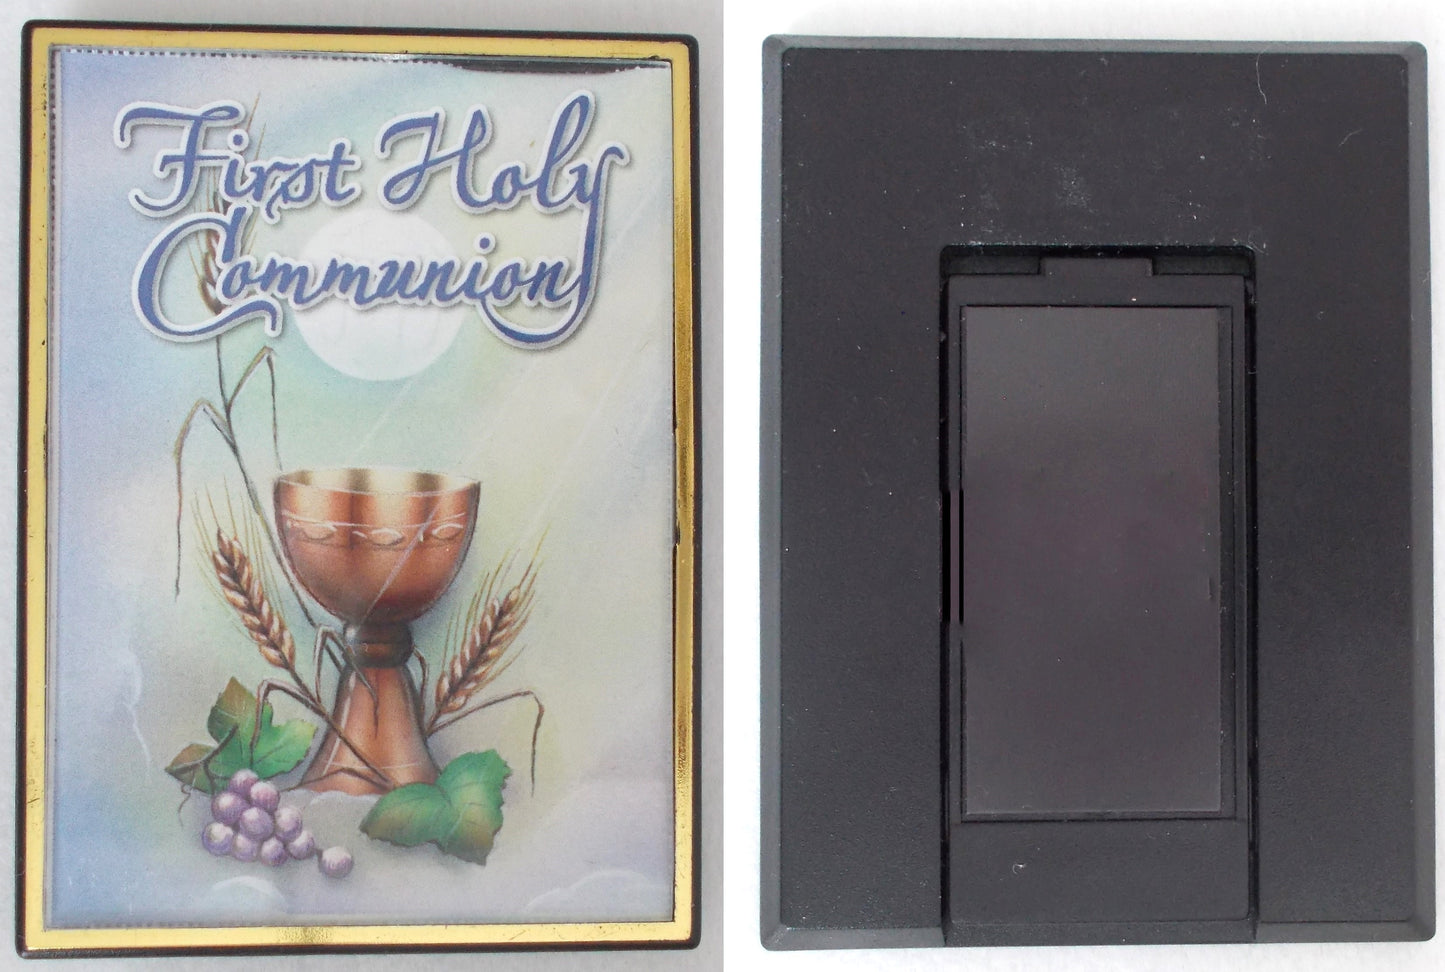 First Holy Communion Mini Plaque - Magnet